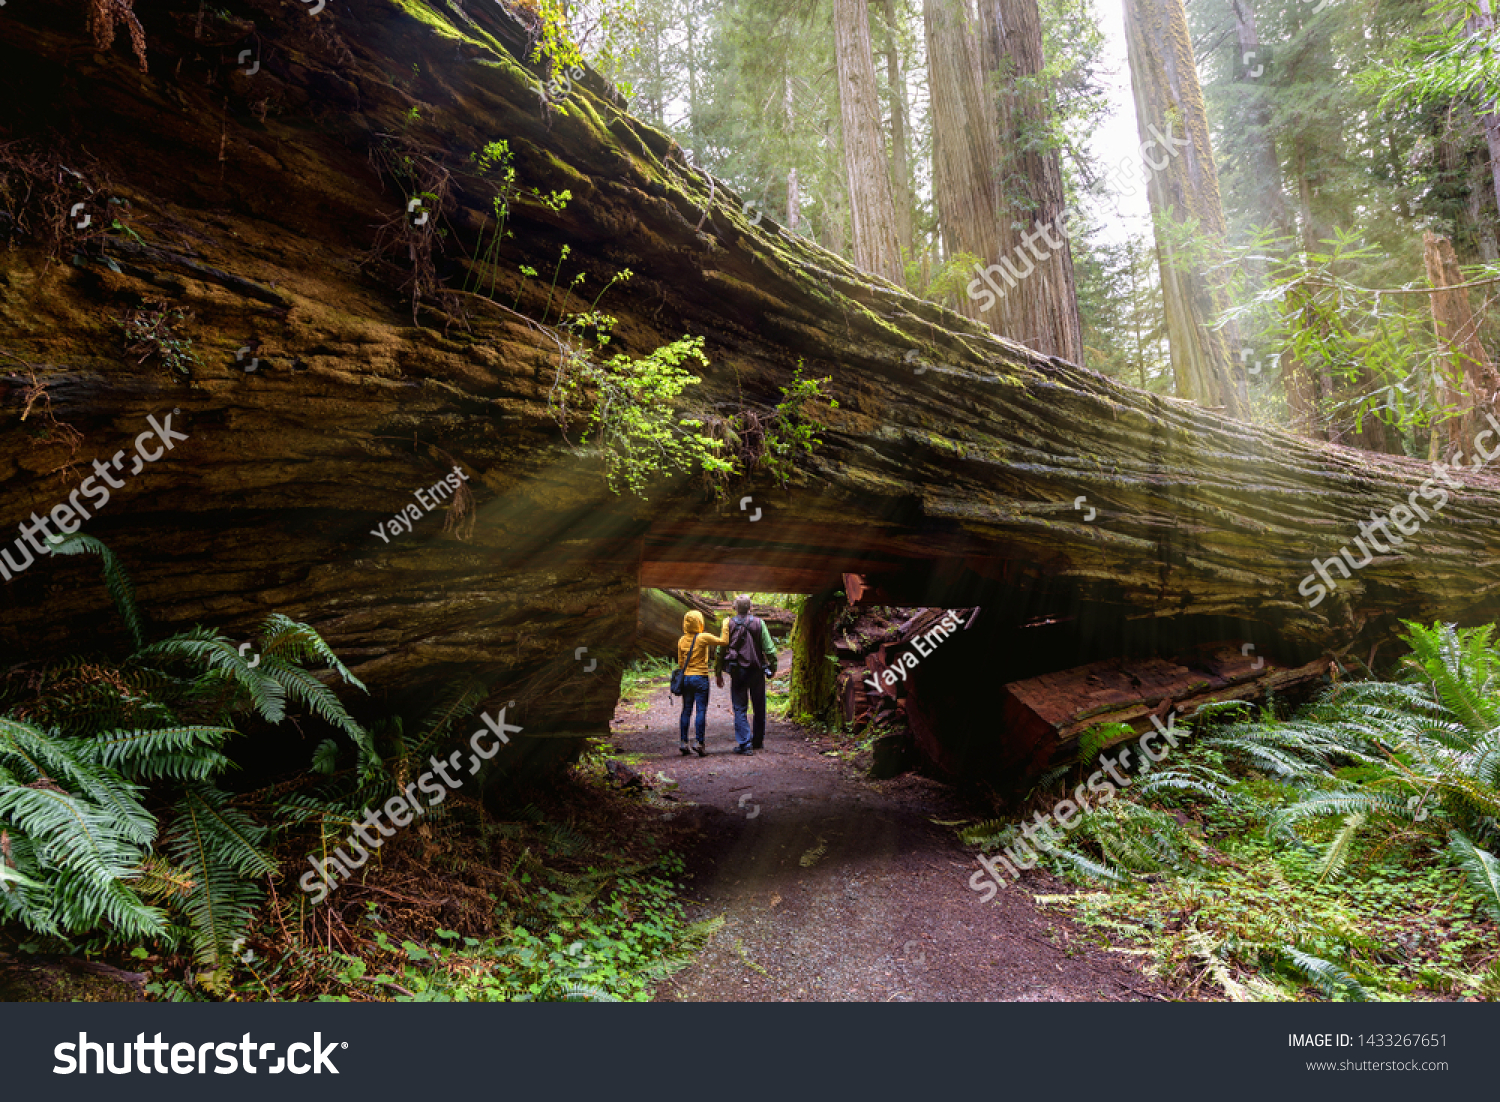 A couple tourists hiking in Redwood National Park, California #1433267651